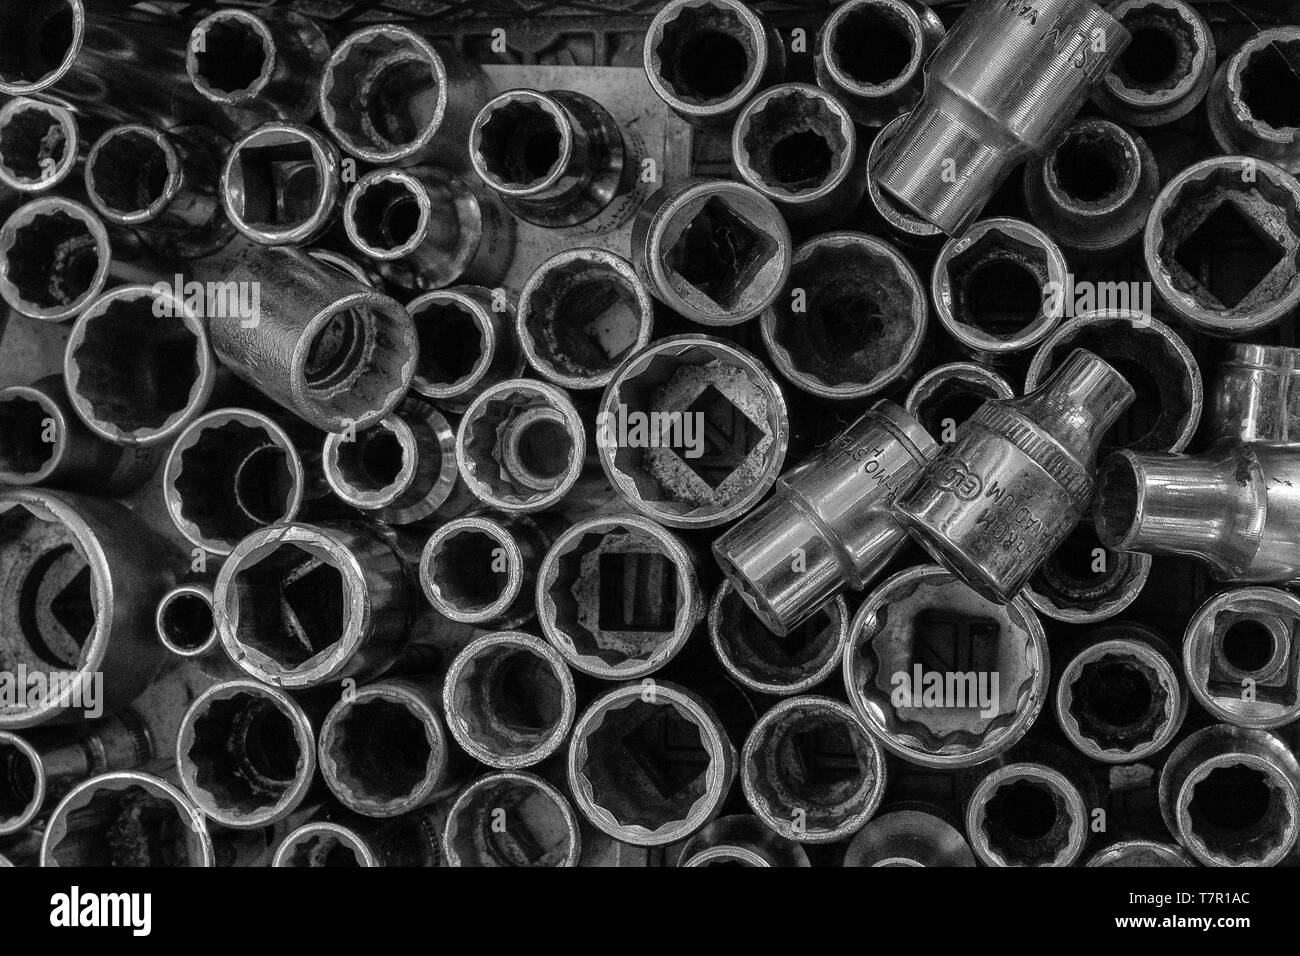 A close up of a black and white image of socket set heads, of various sizes. Stock Photo